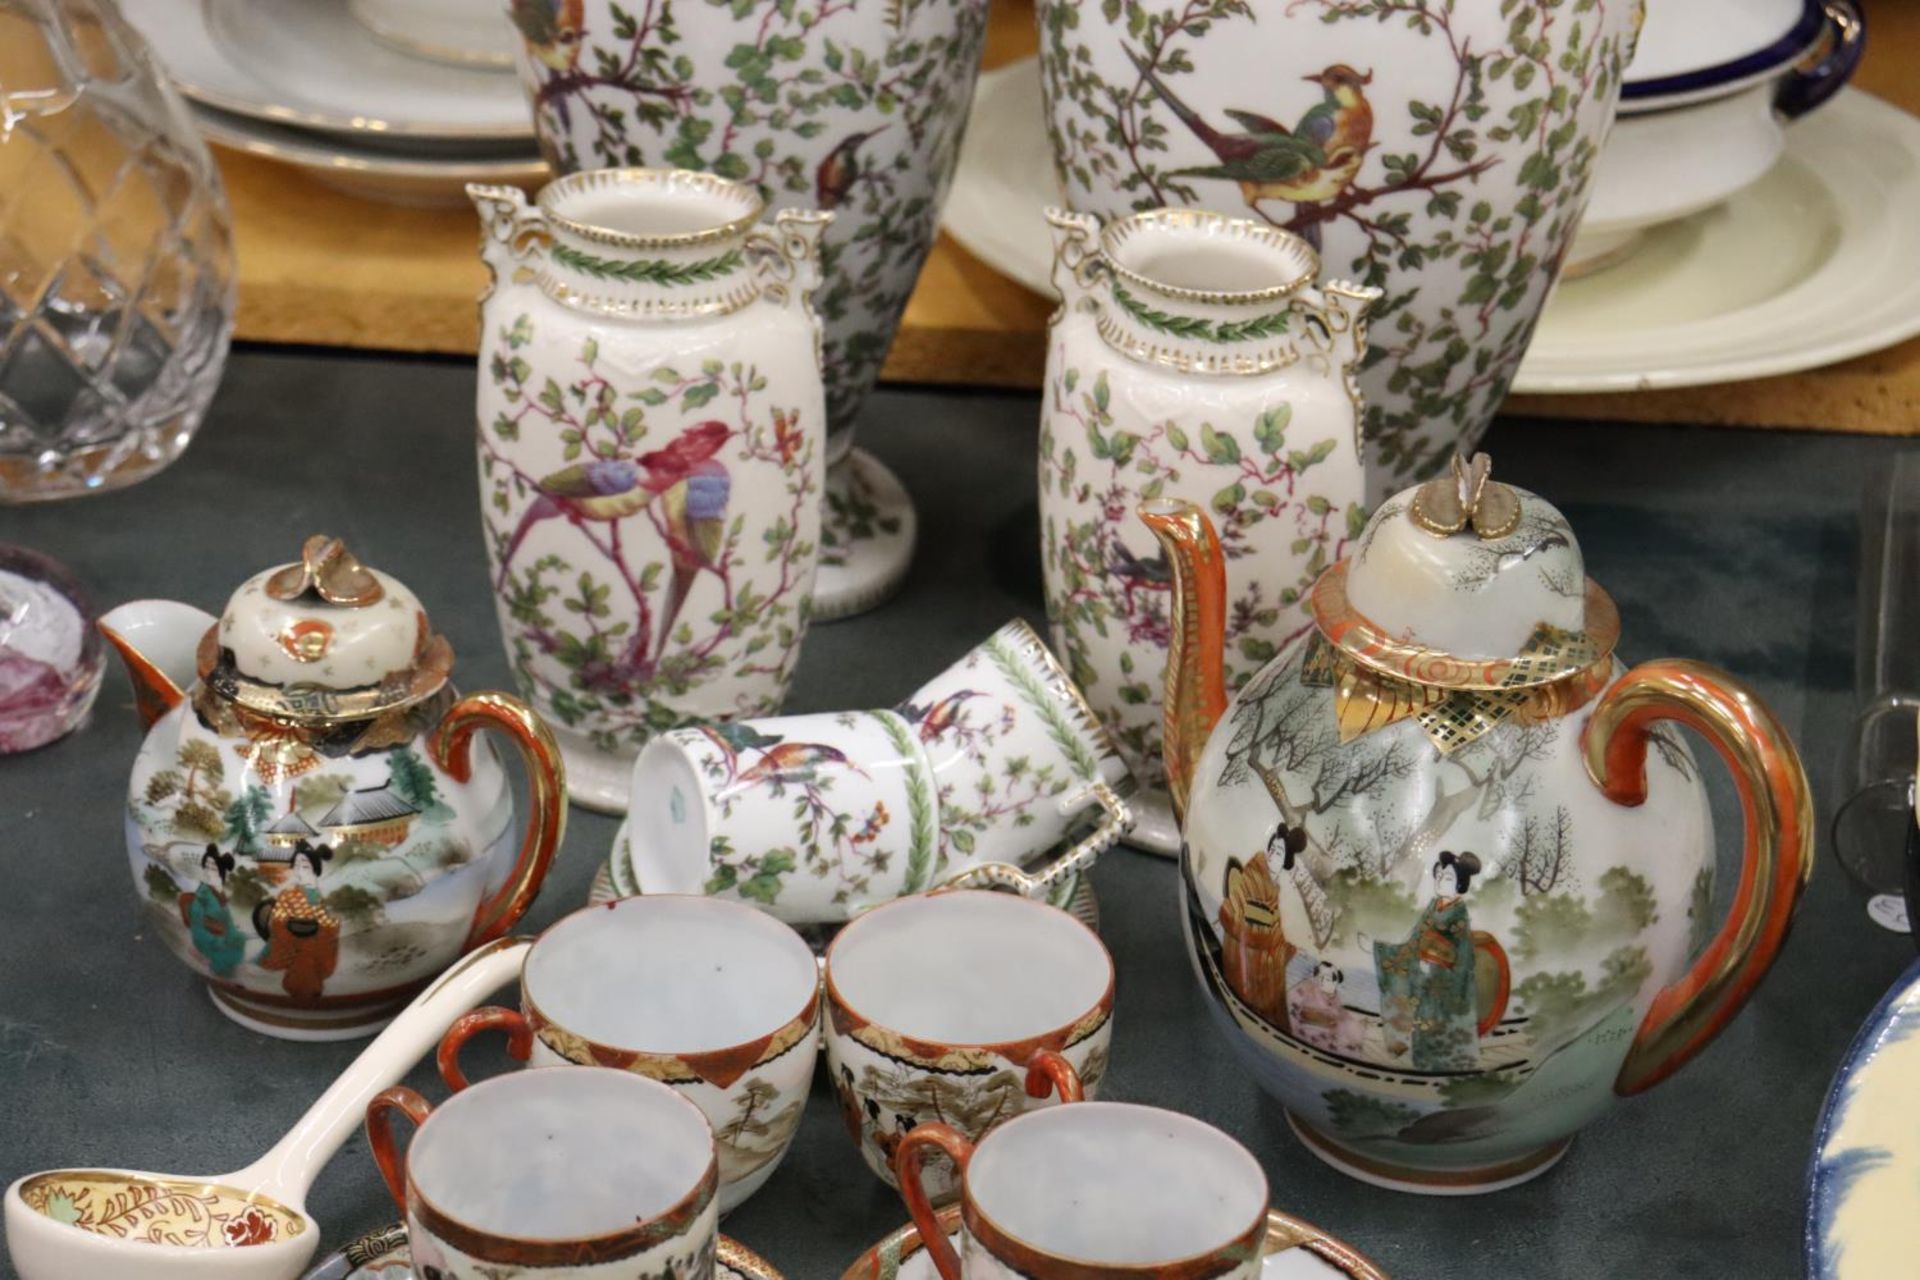 AN ORIENTAL TEASET TO INCLUDE TEAPOT, CUPS AND SAUCERS AND TO AUSTRIA VICTORIA LARGE VASES - Image 3 of 5